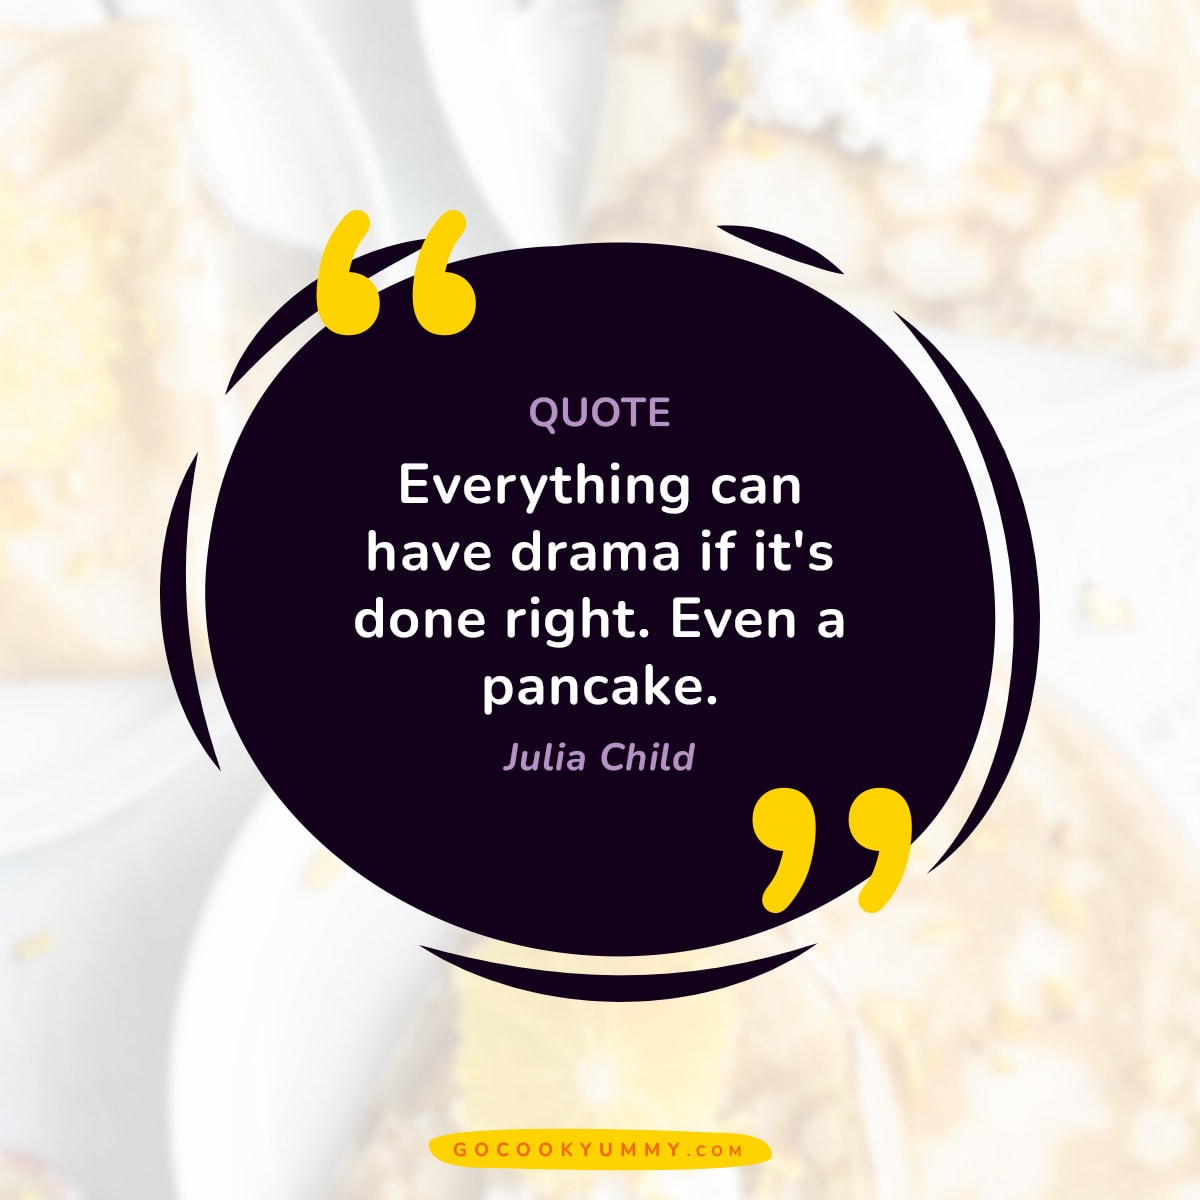 Everything can have drama if it's done right. Even a pancake.